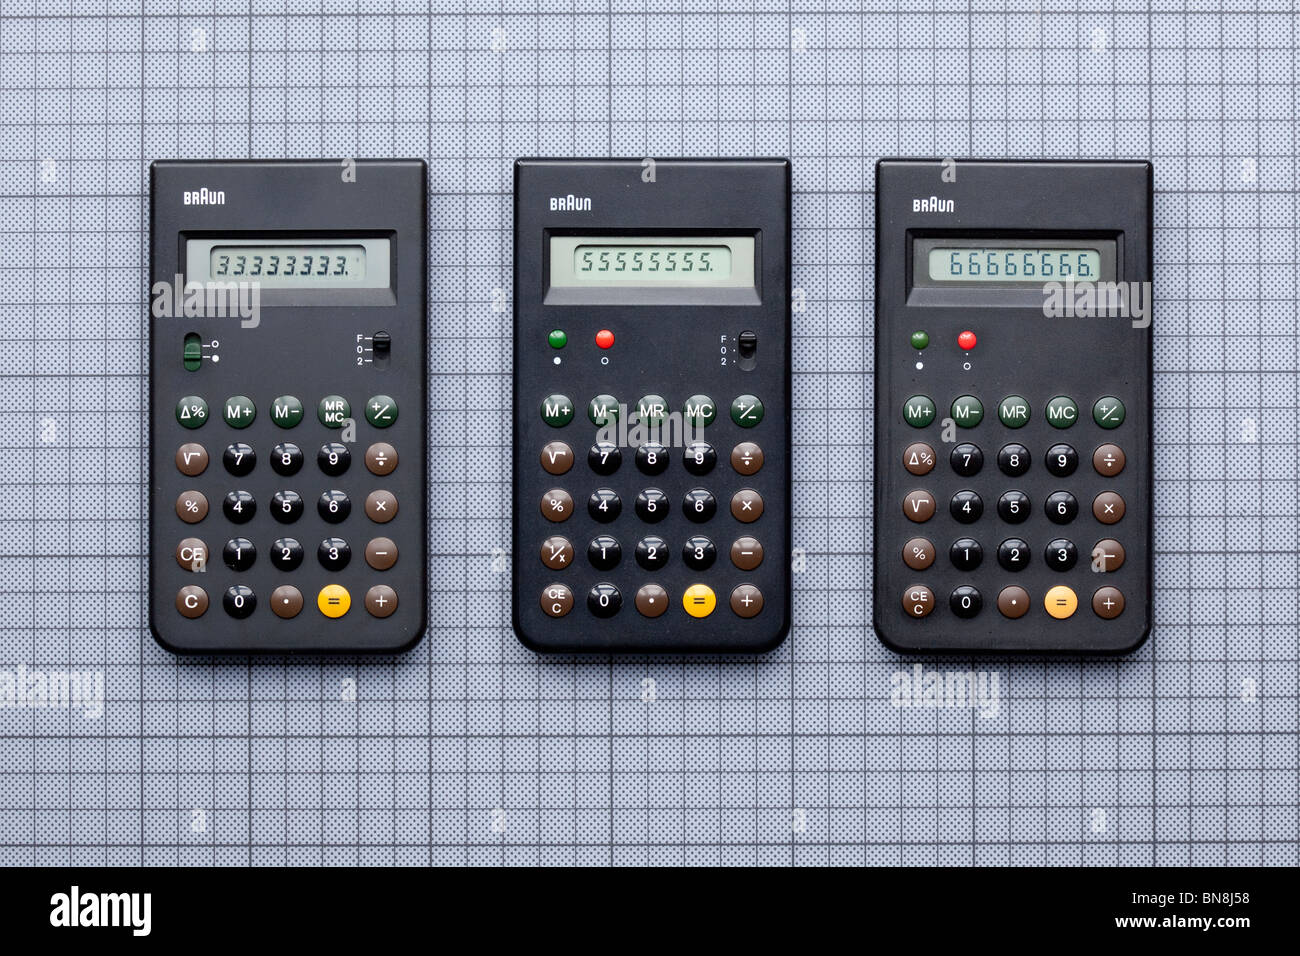 Three Braun calculators, ET33, ET55 and ET66, designed by Dieter Rams and Dietrich Lubs, 1977 - 1987 . and inspiration for the iPhone design Stock Photo